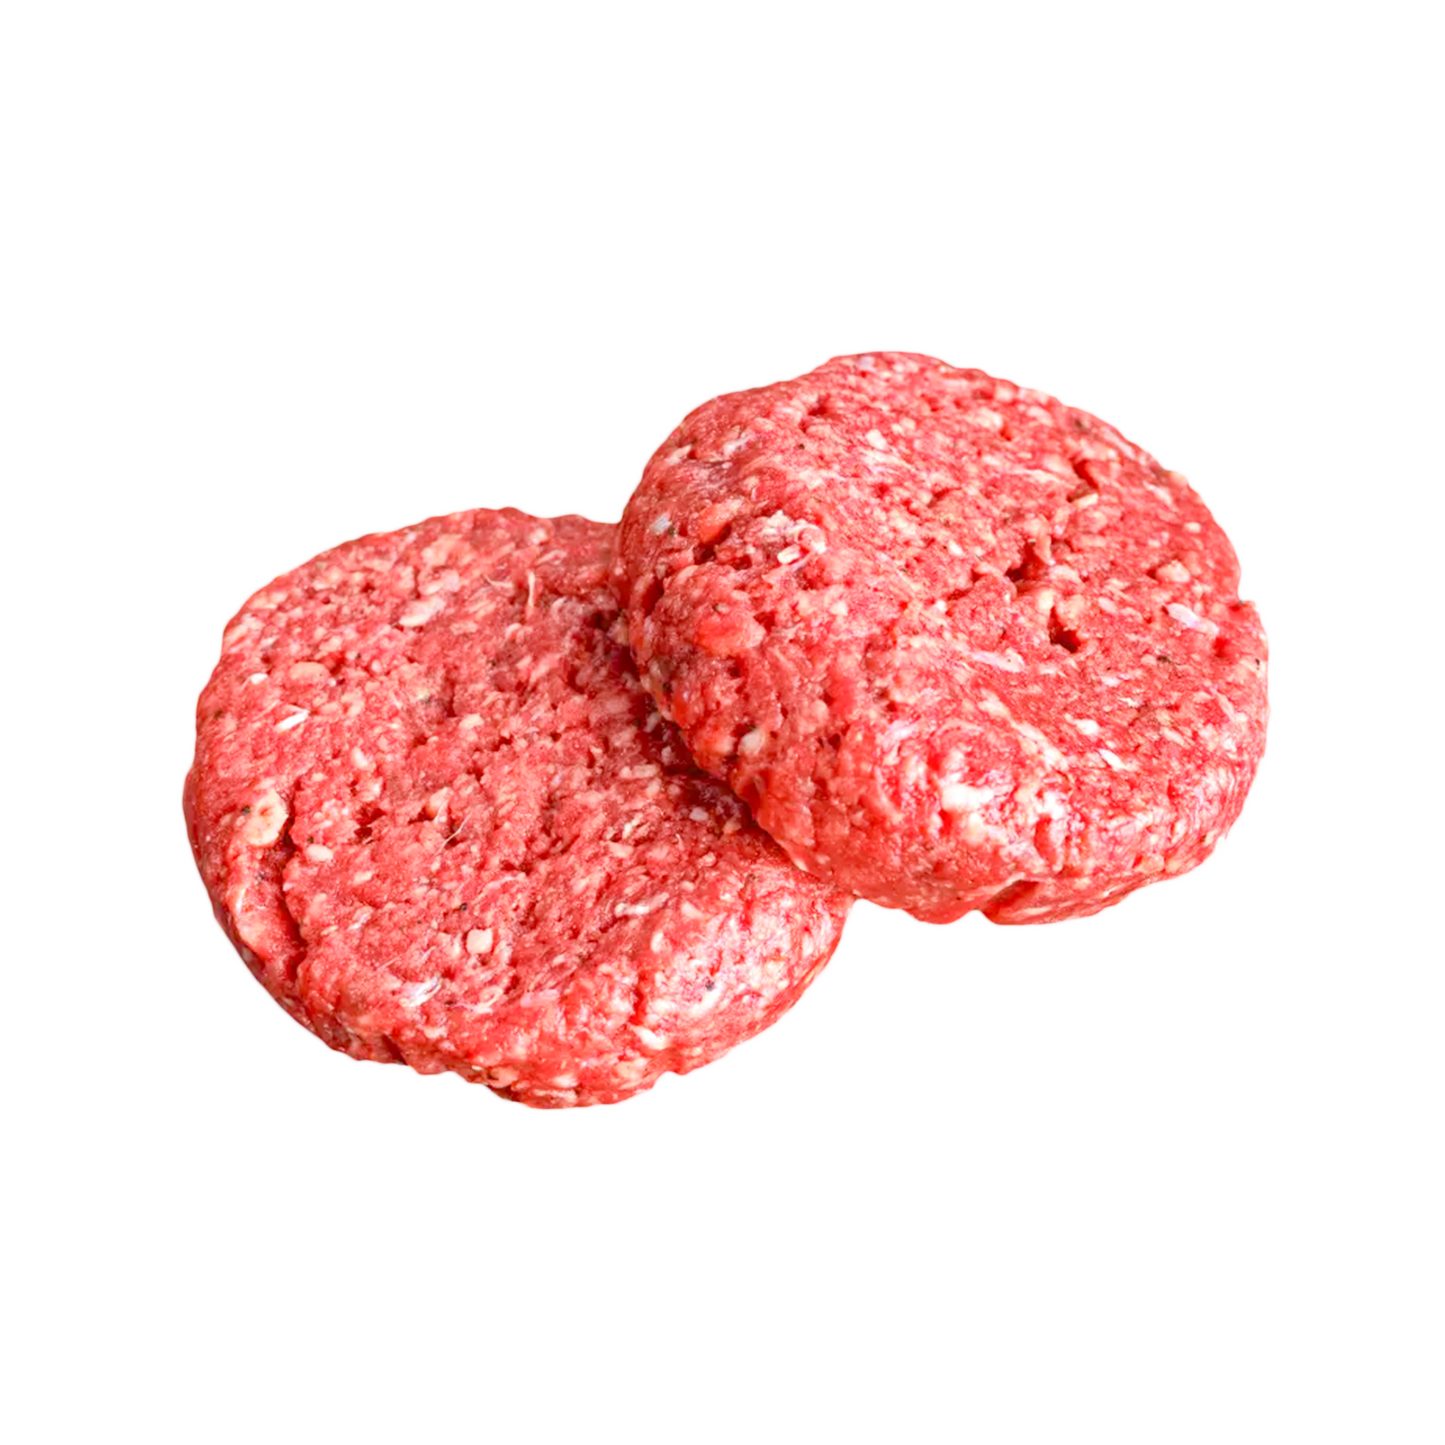 American Bison Ground Meat